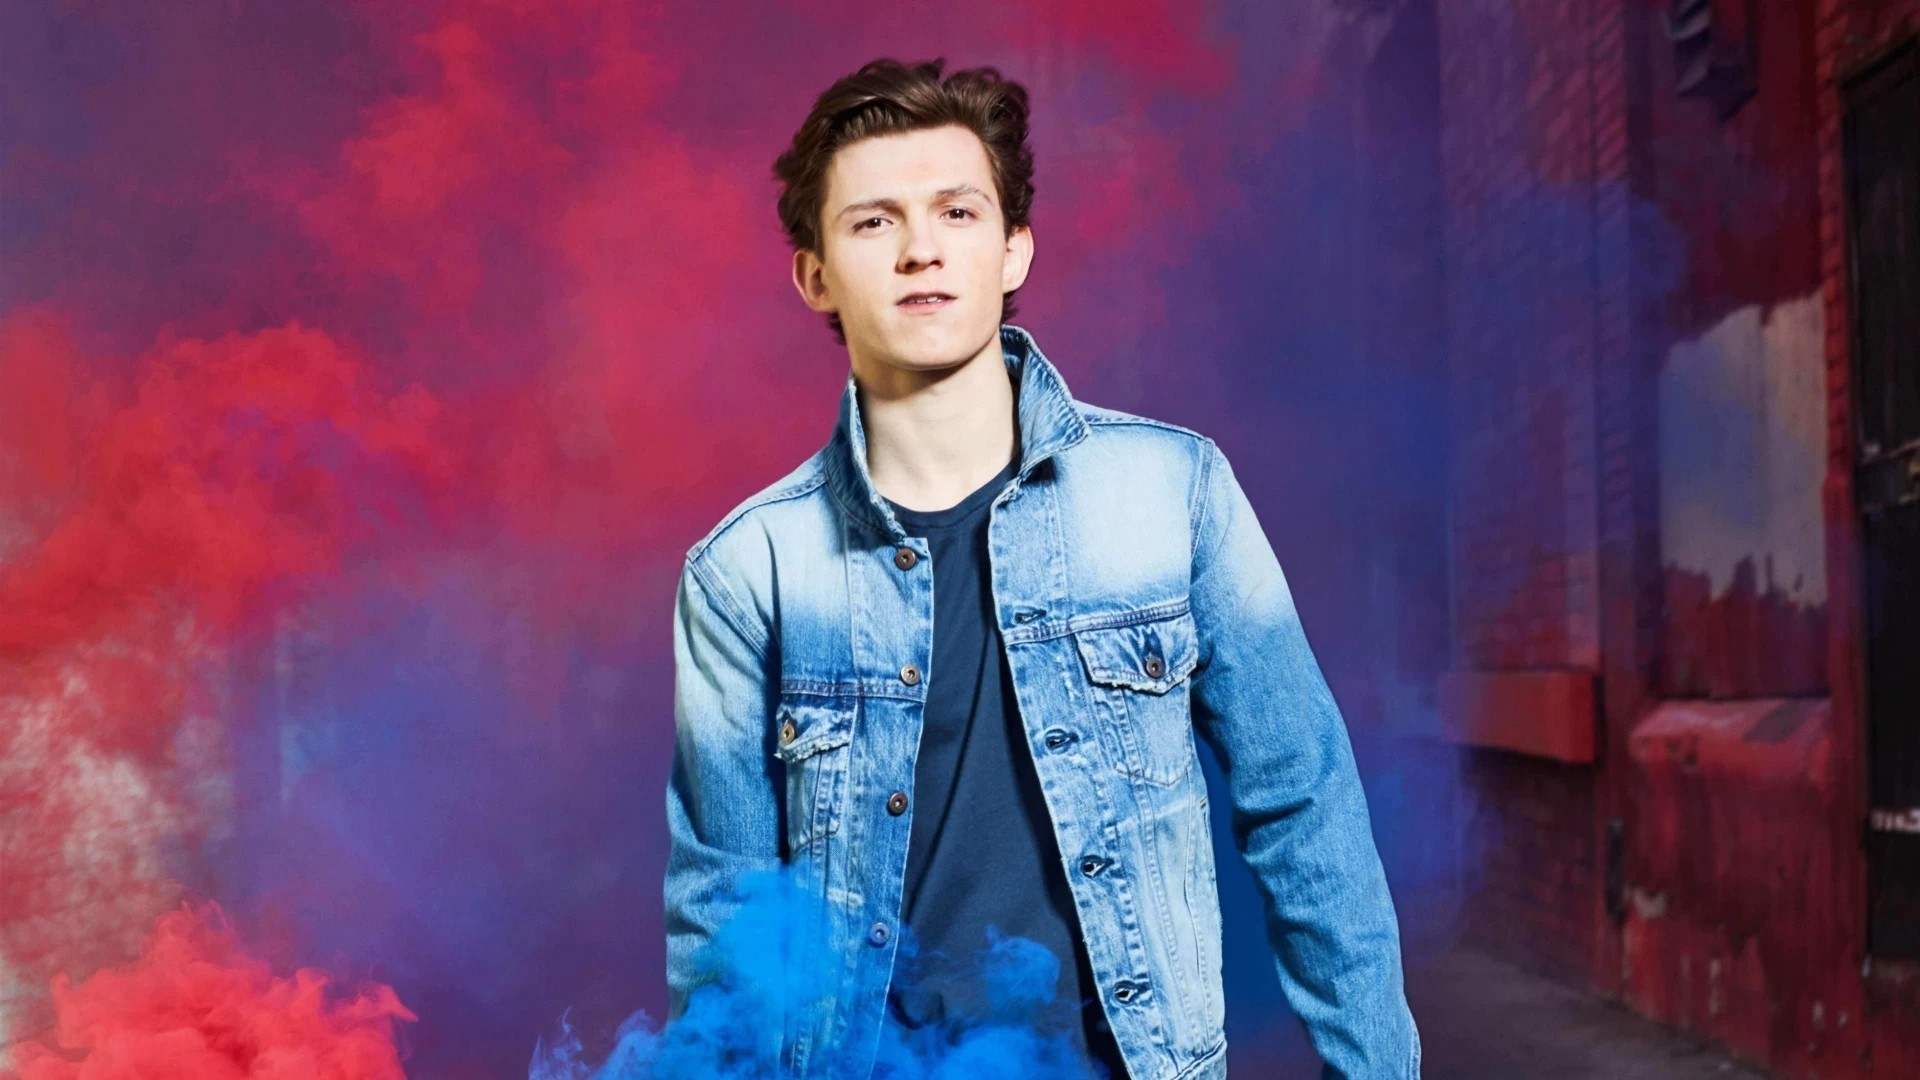 Tom Holland Wallpaper Picture hd